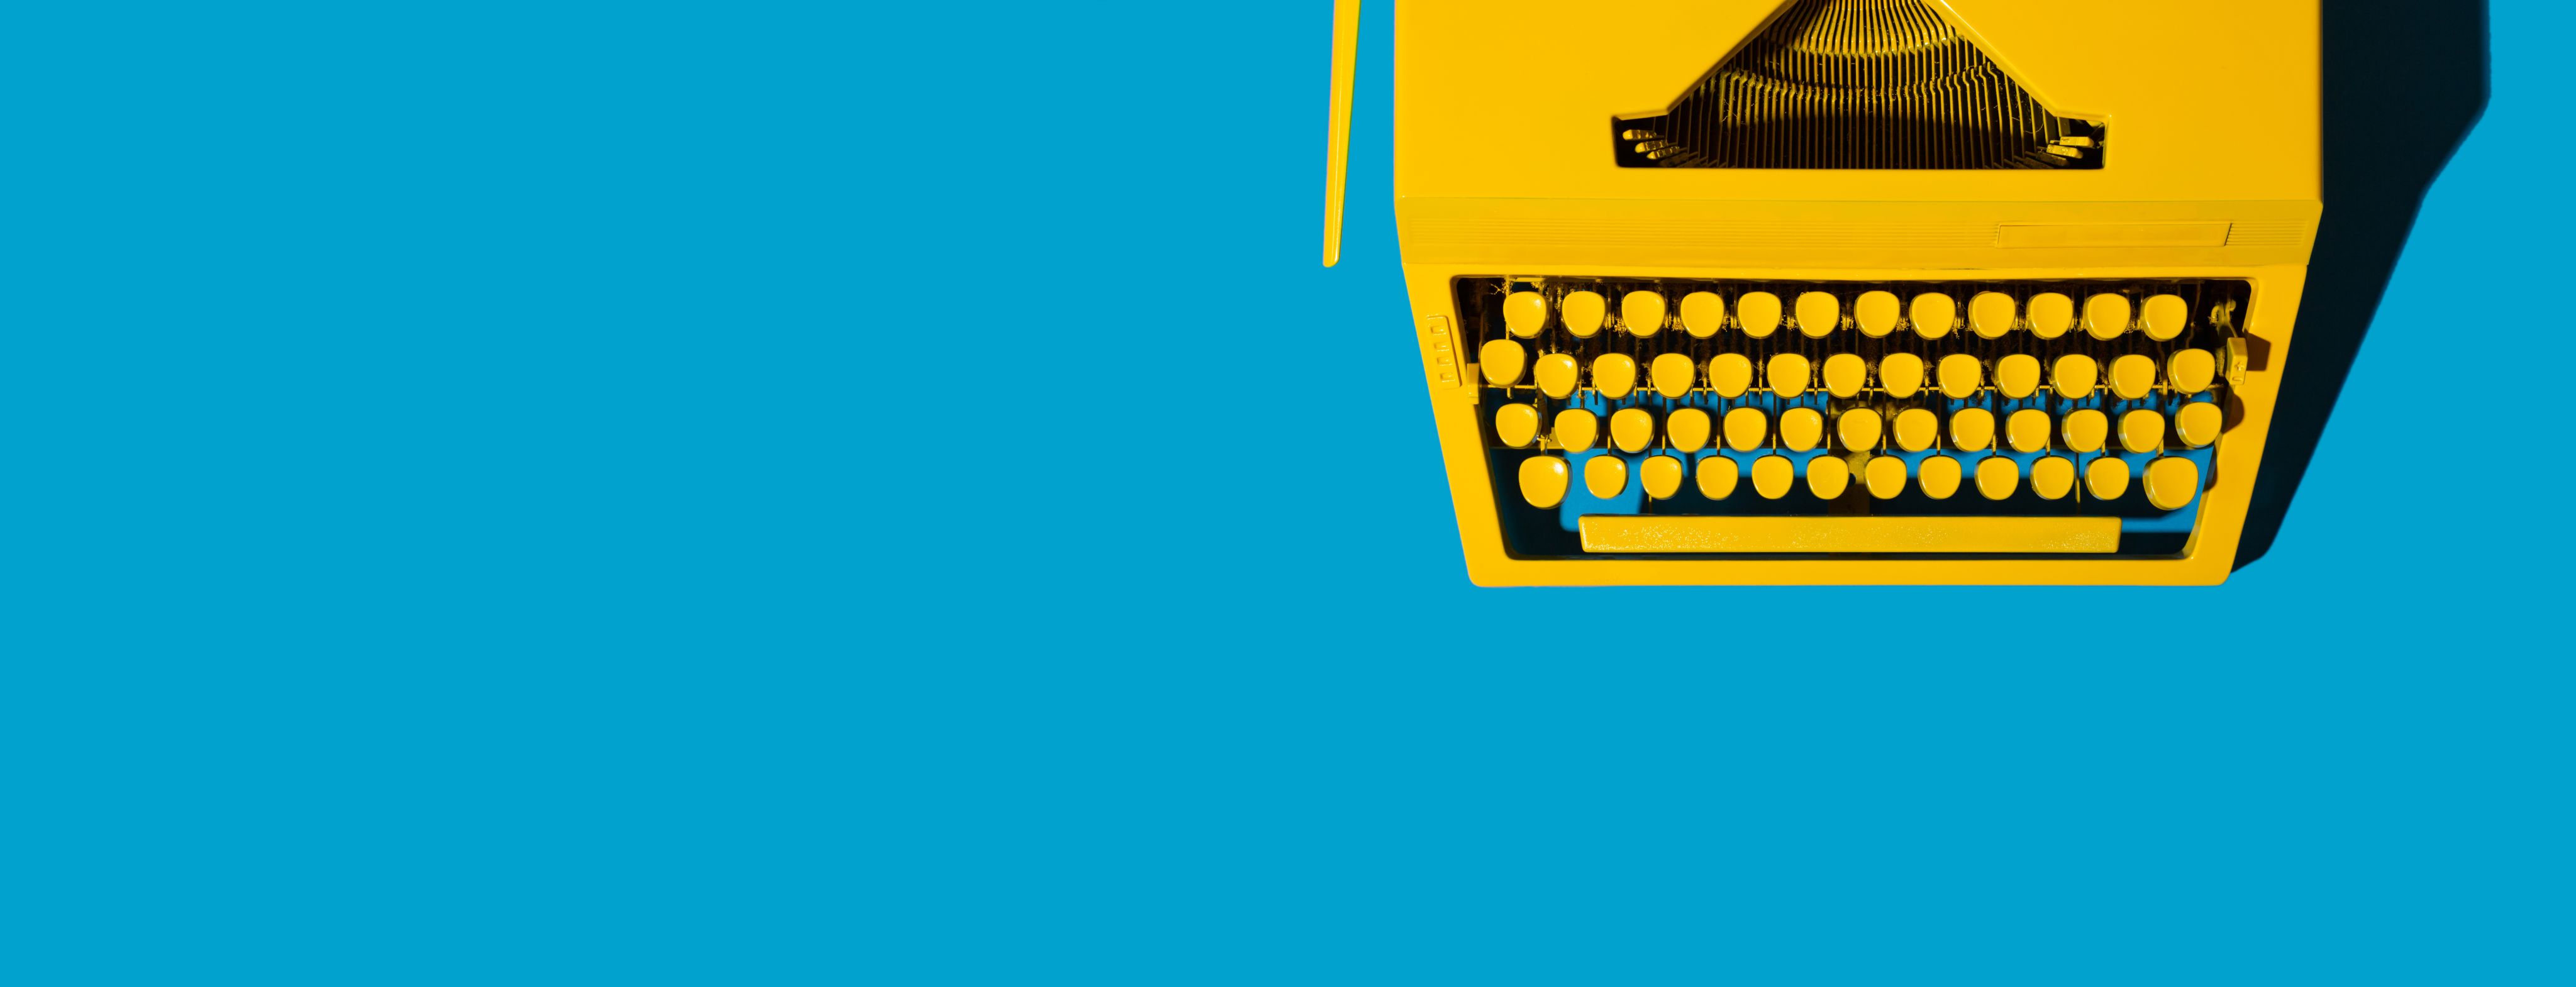 Bright blue background with a yellow typewriter